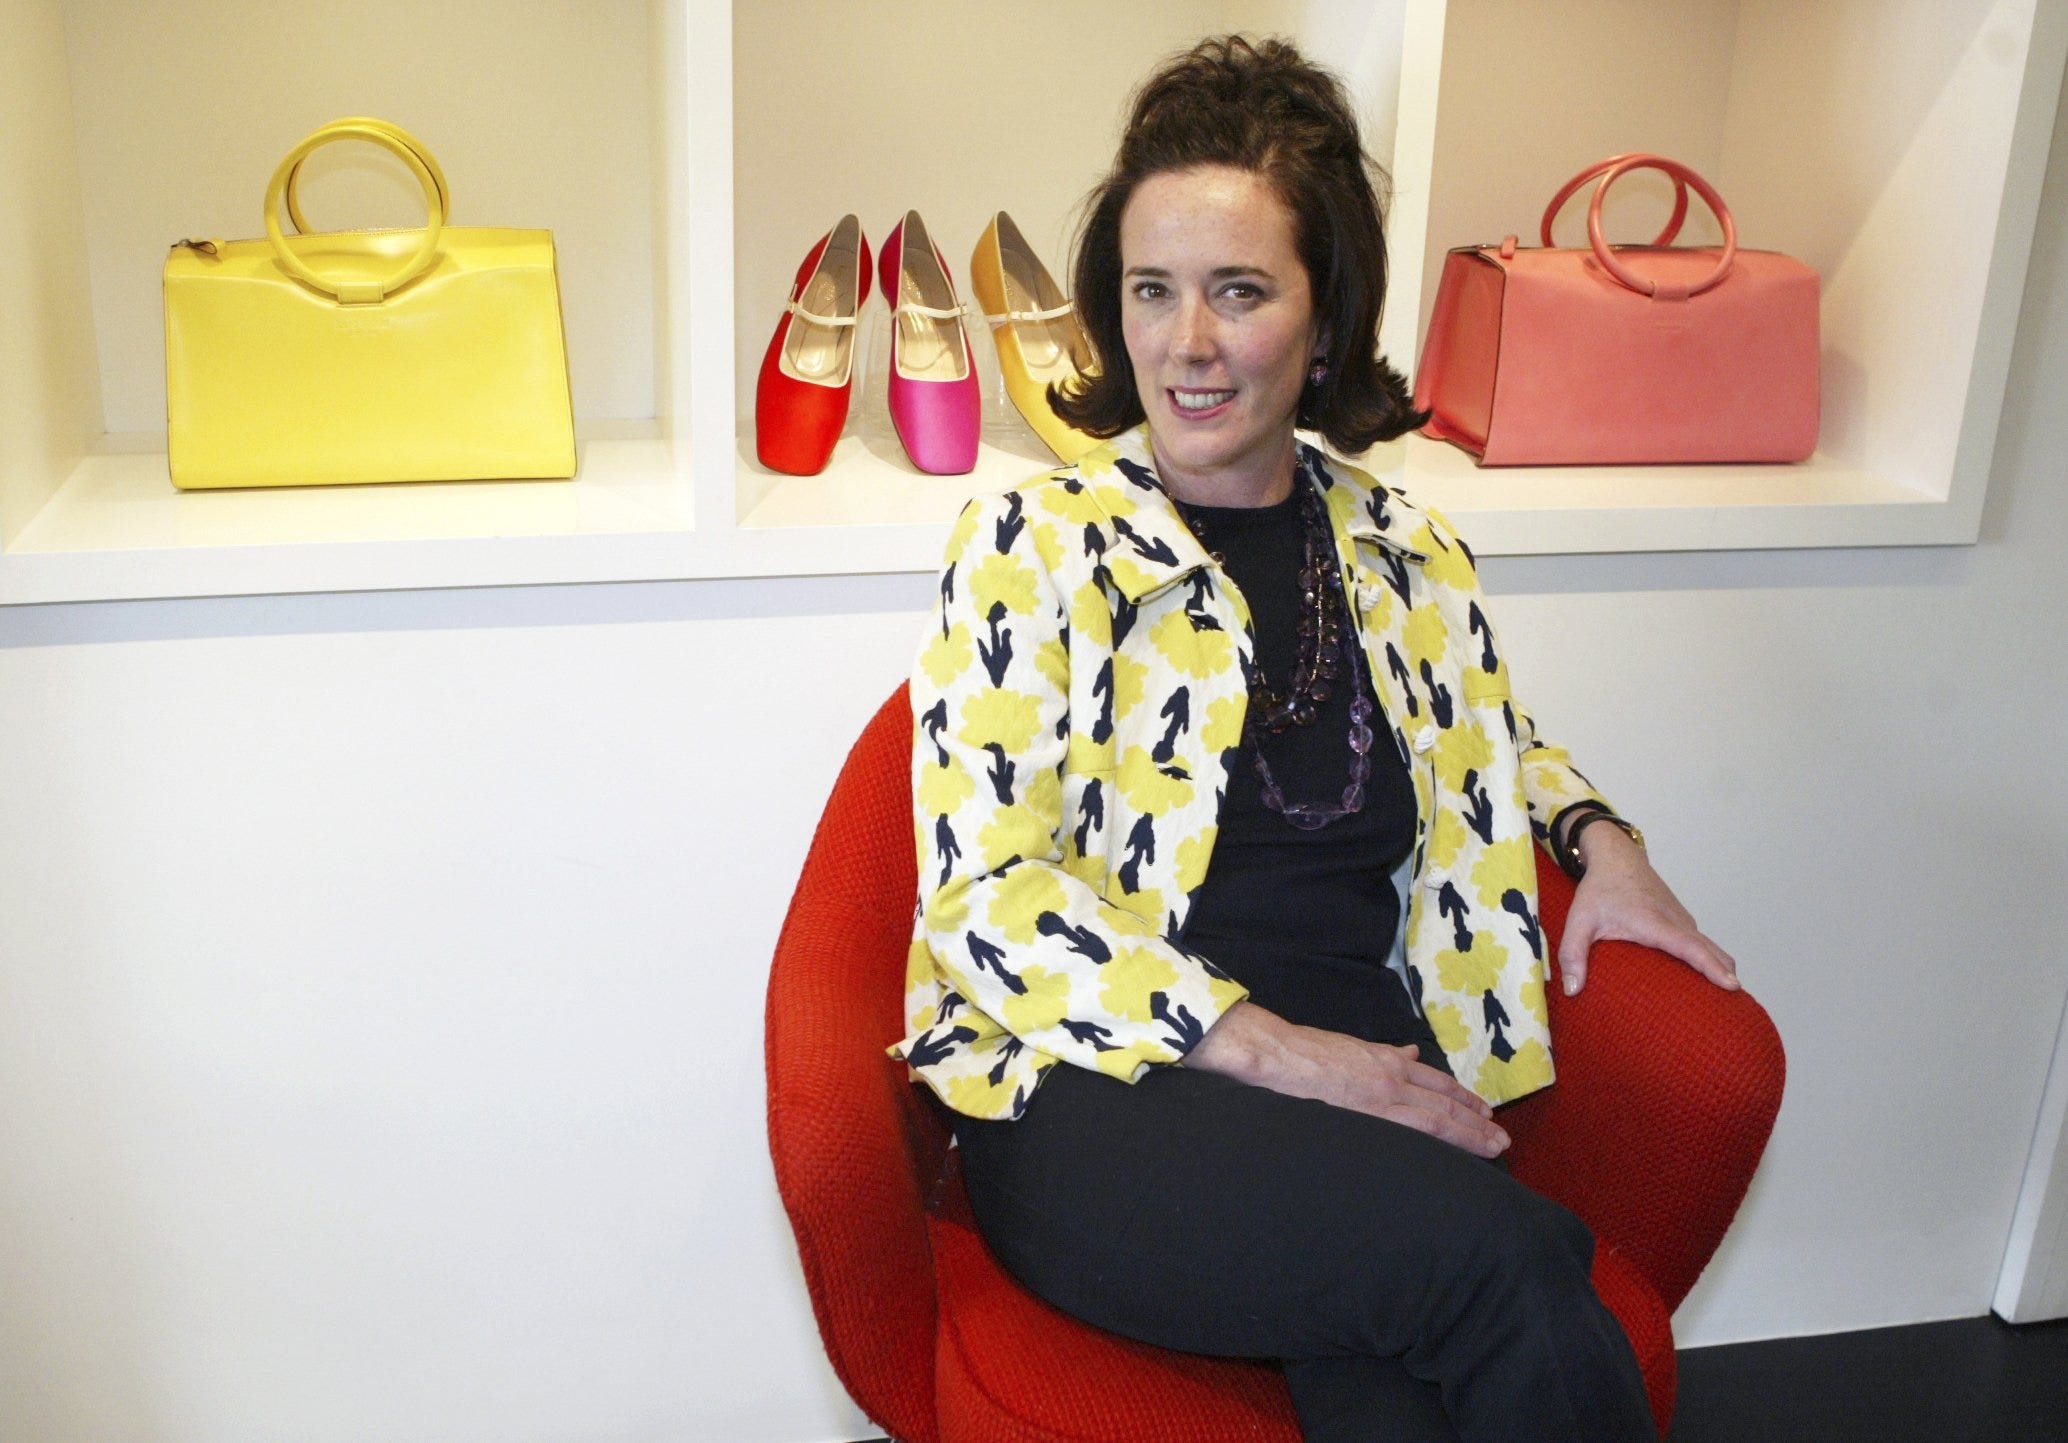 Kate Spade's death ruled a suicide by hanging